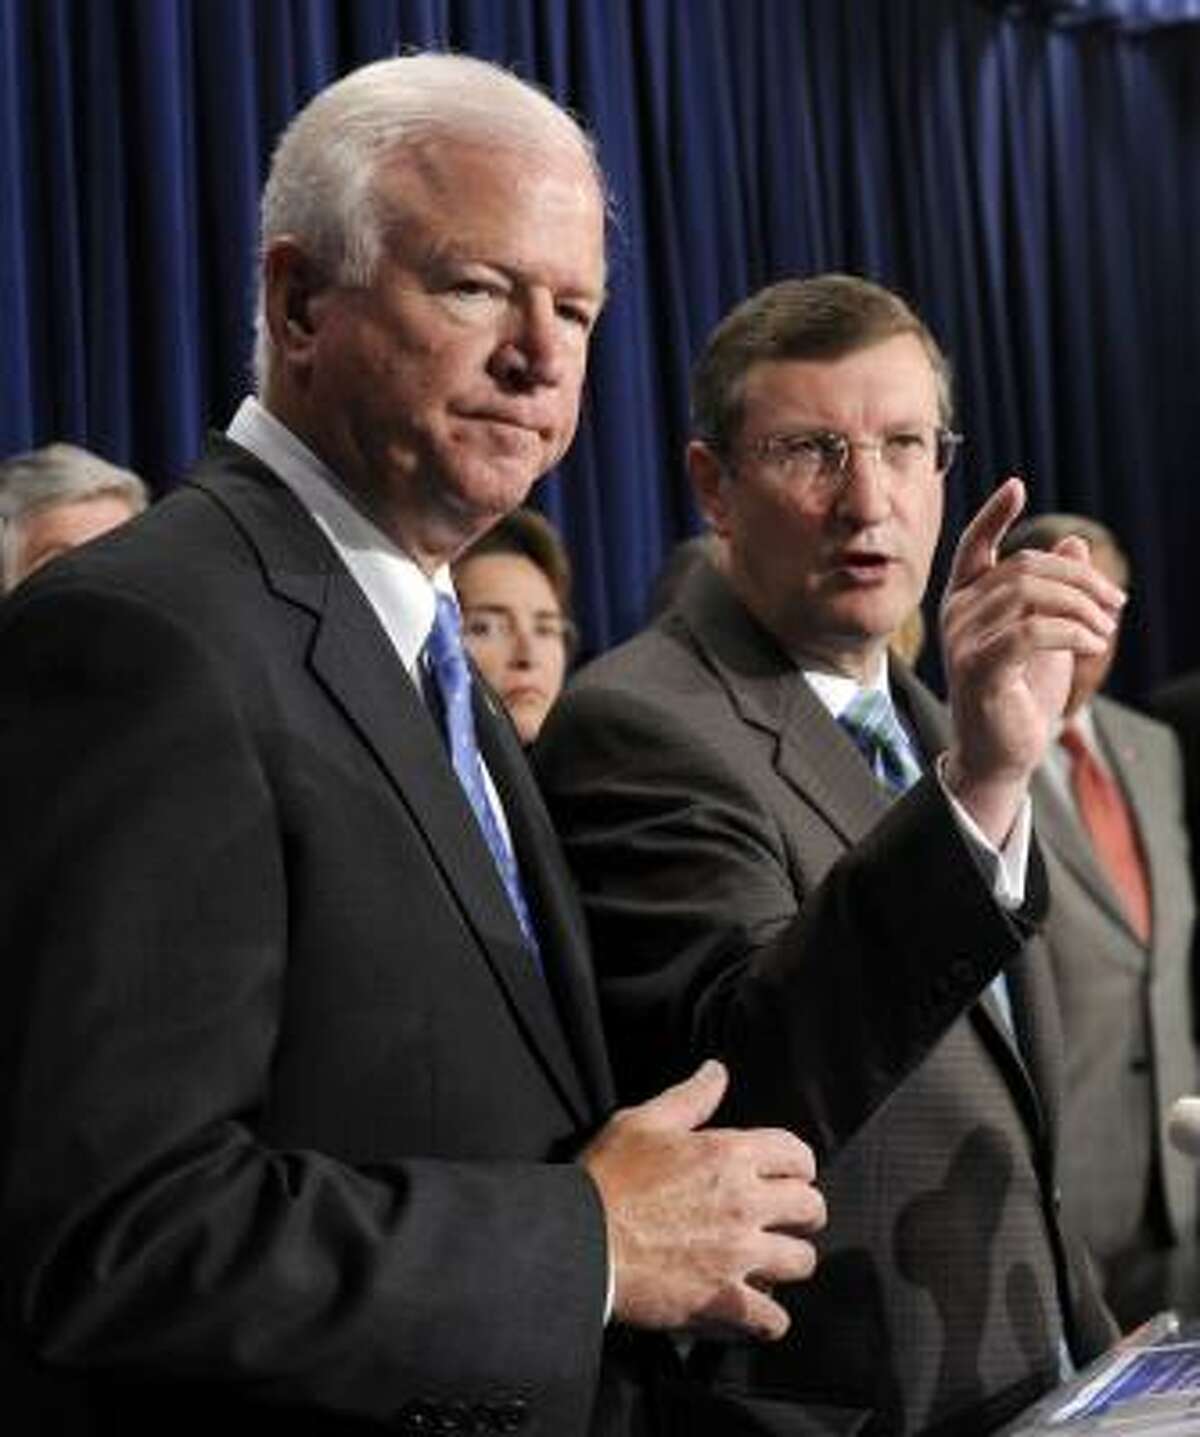 Sen. Saxby Chambliss, R-Ga., left, and Sen. Kent Conrad, D-N.D., right, both members of the bipartisan coalition of Senators know as the "Gang of Ten," discuss their energy plan, Friday.